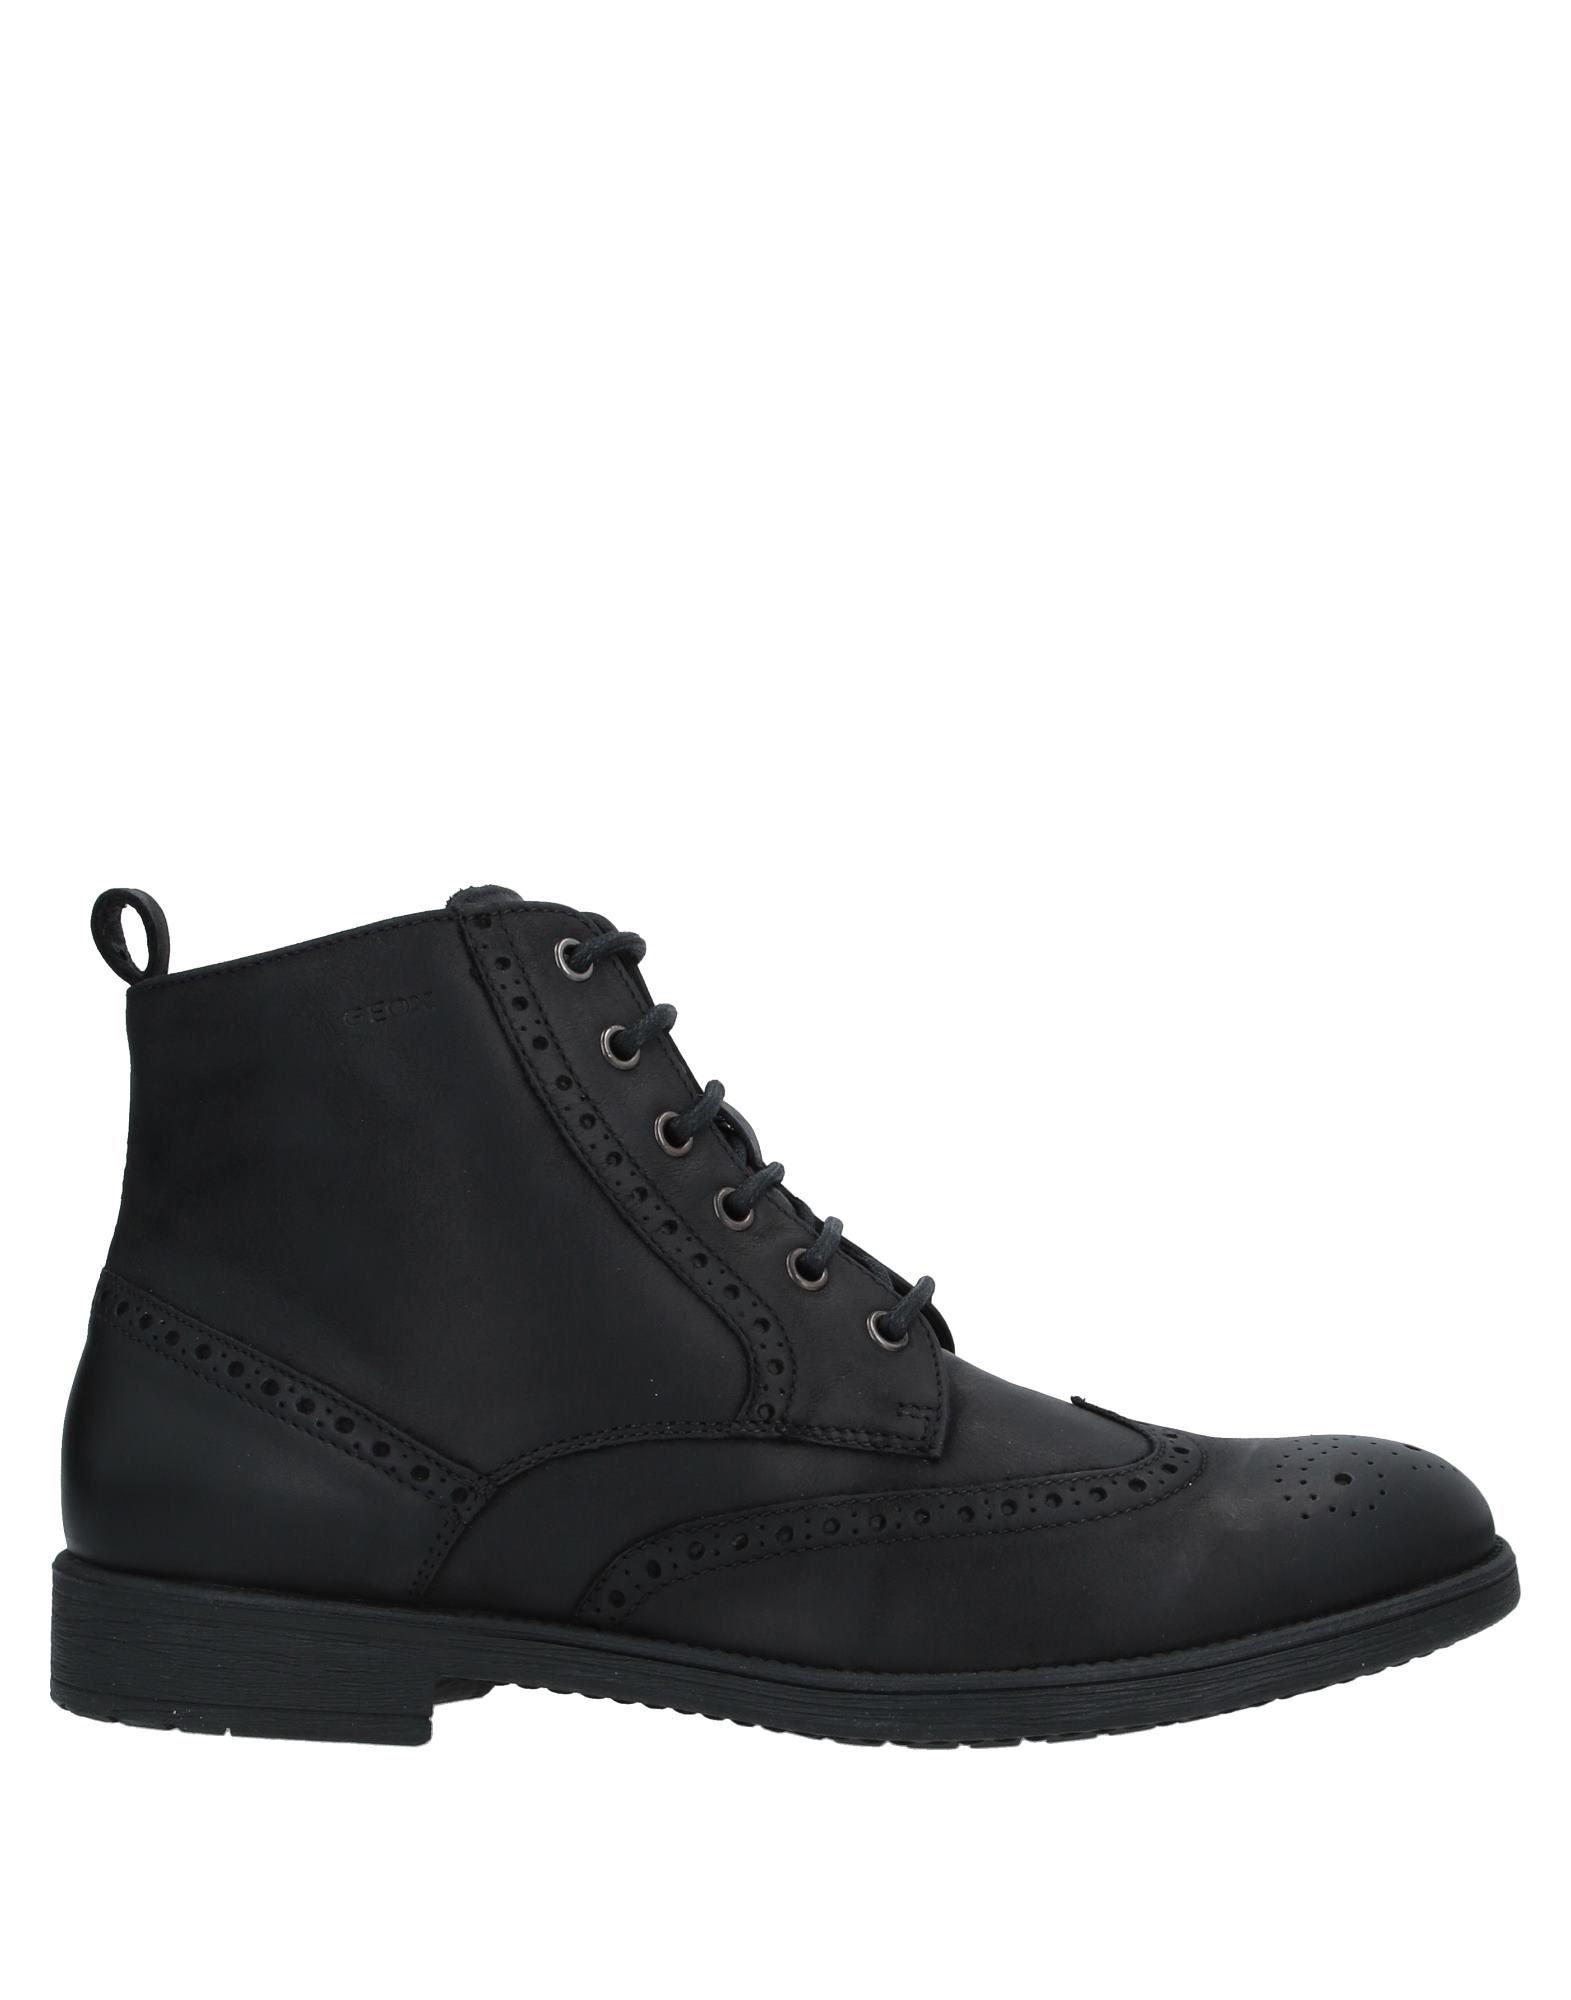 Geox Ankle Boots in Black for Men - Lyst